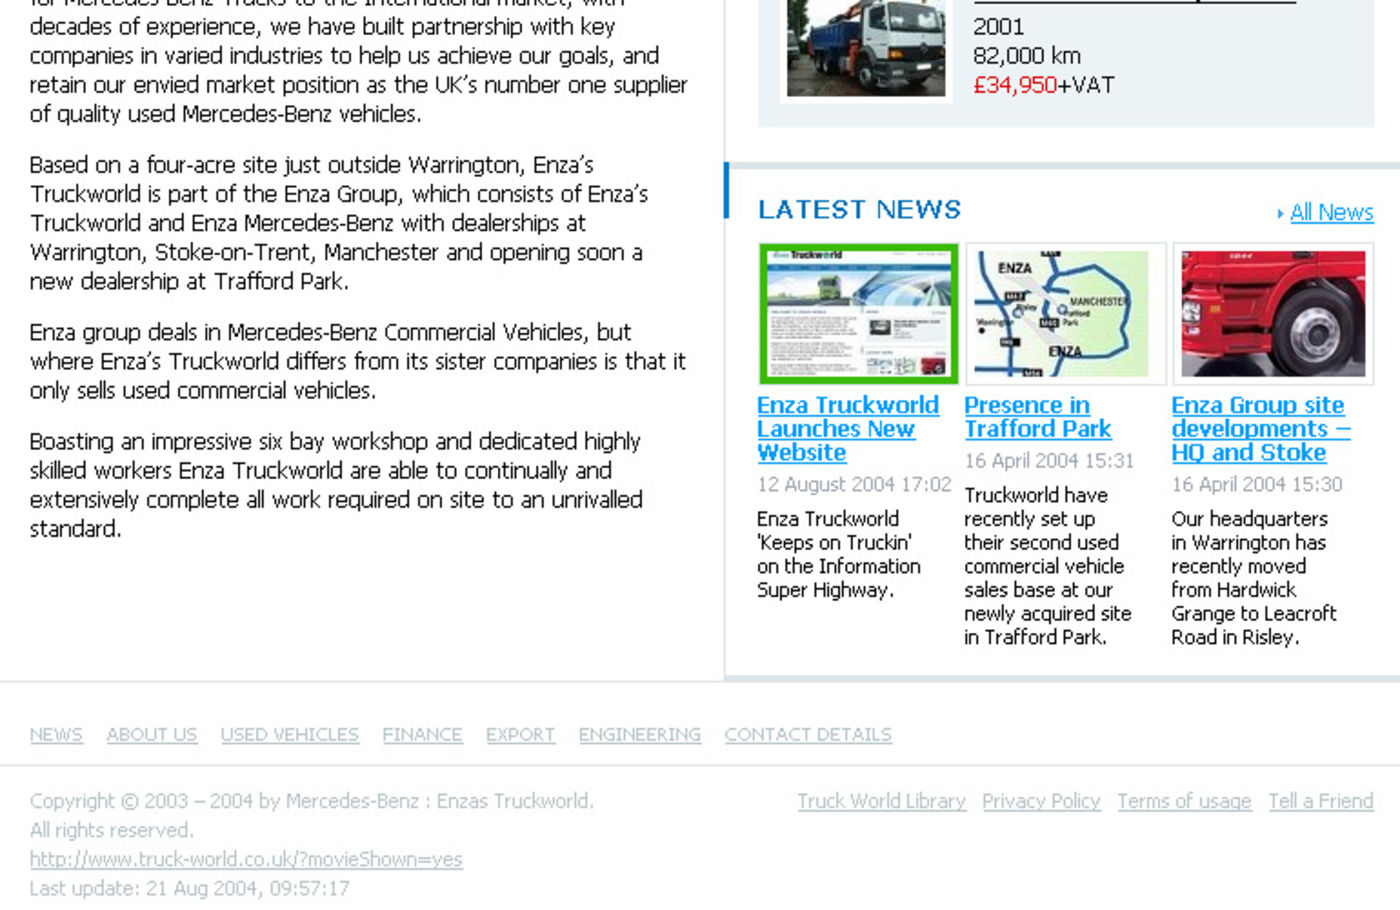 Enza's Truck World Homepage footer